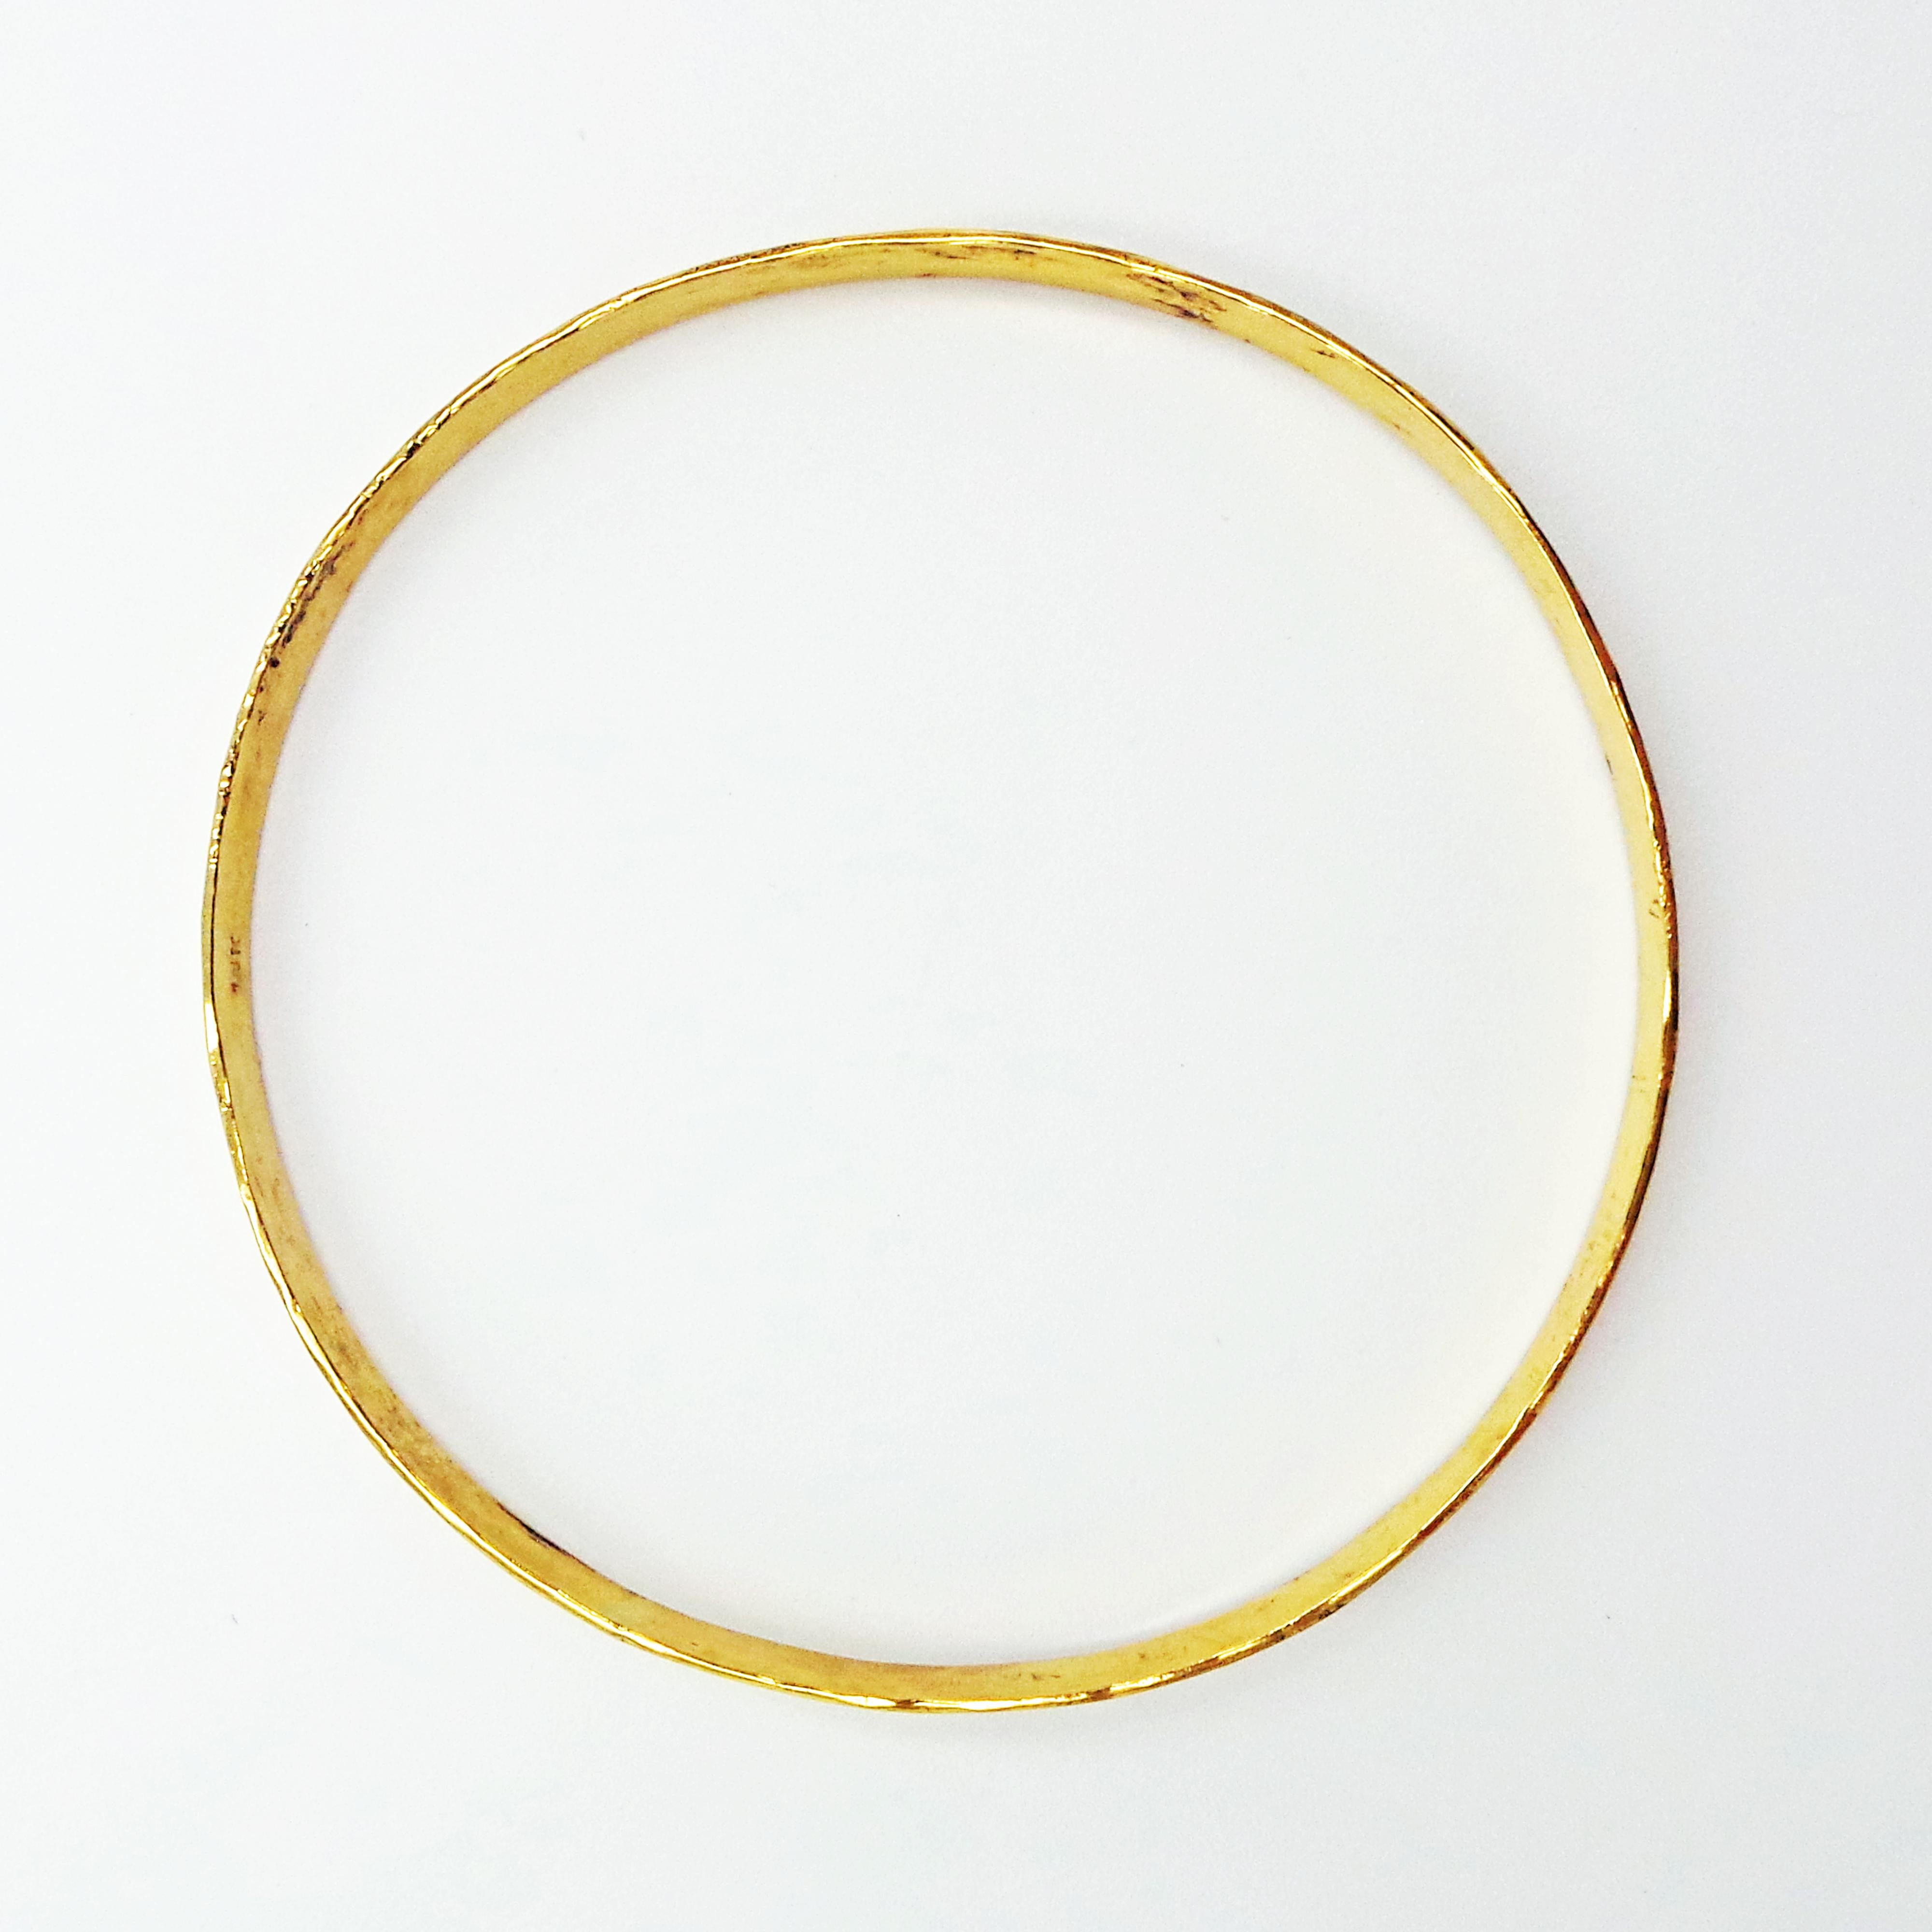 Solid 18k yellow gold bangle is hand-forged and finished with a hammered, rustic texture. Bracelet is 2.5